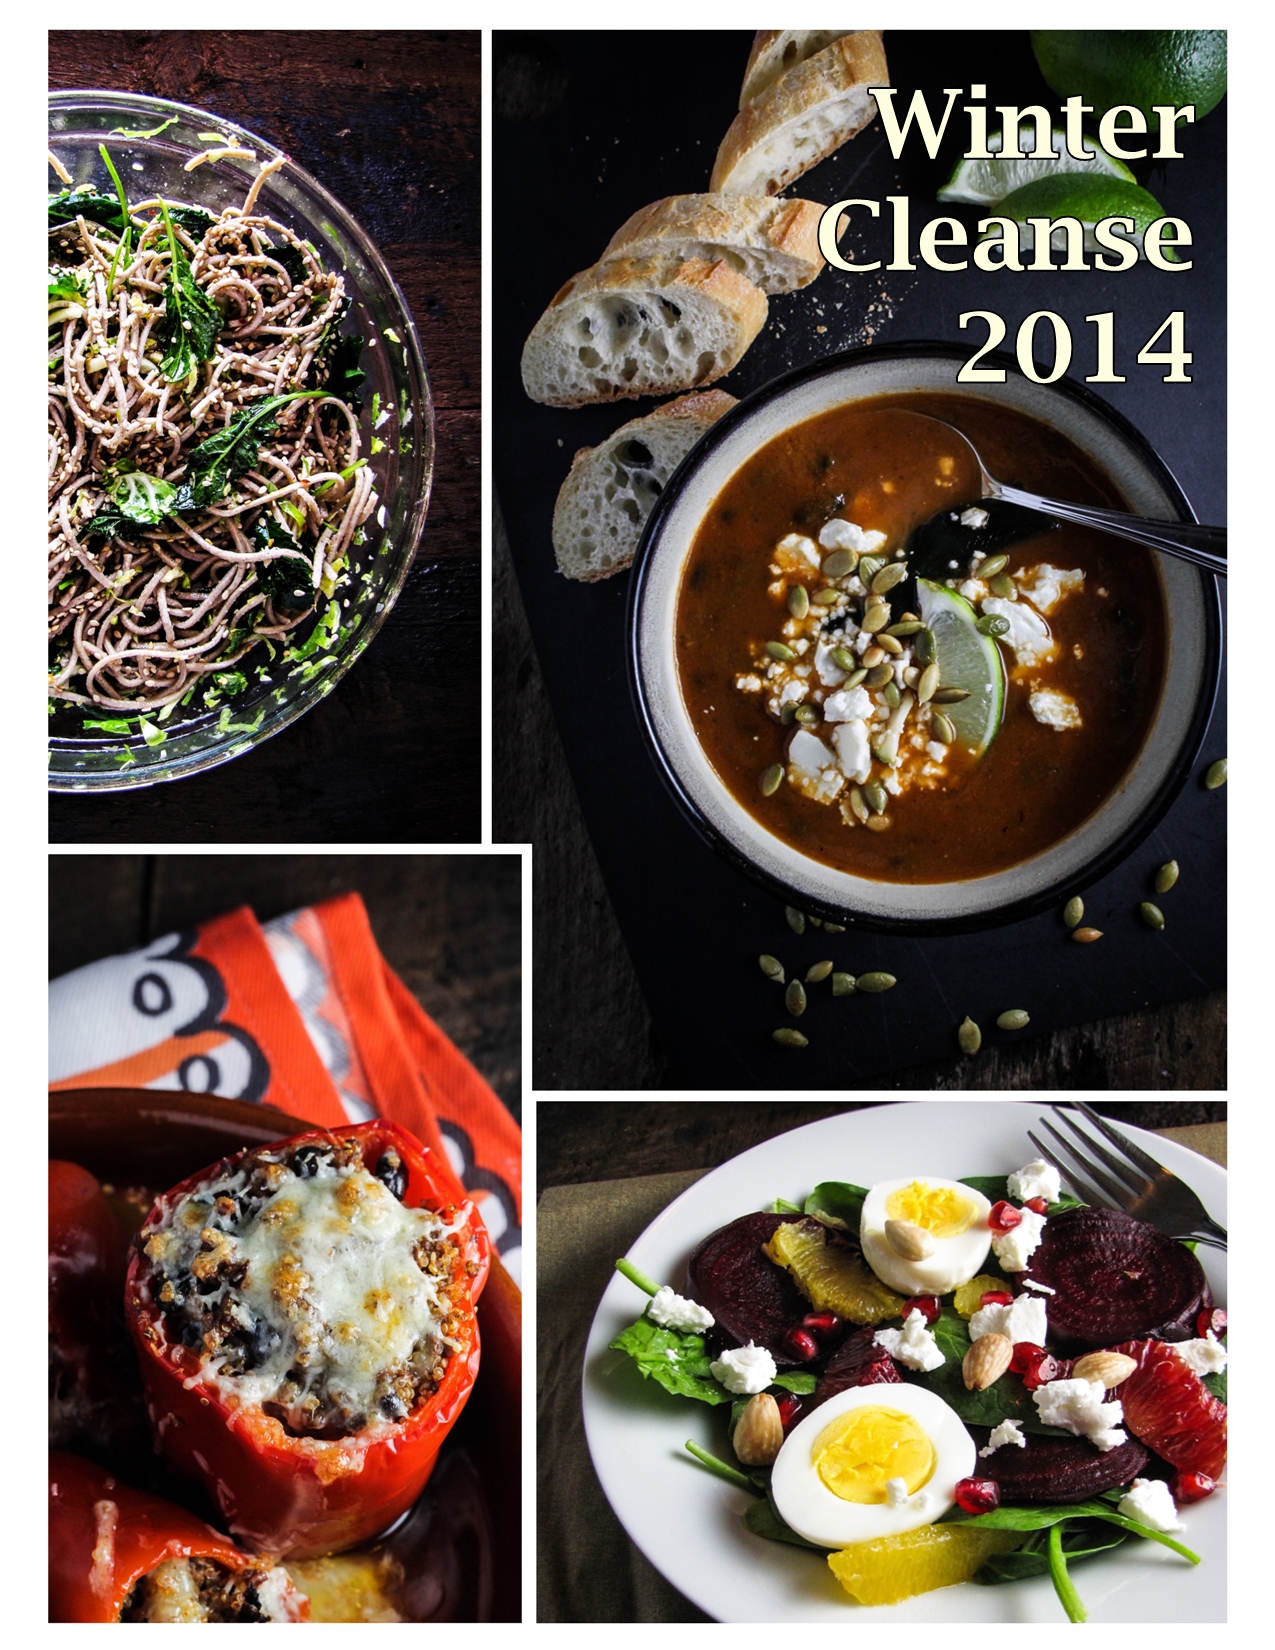 Winter Cleanse 2014 - 14 Healthy, Seasonal, and Delicious Recipes from Katie at the Kitchen Door